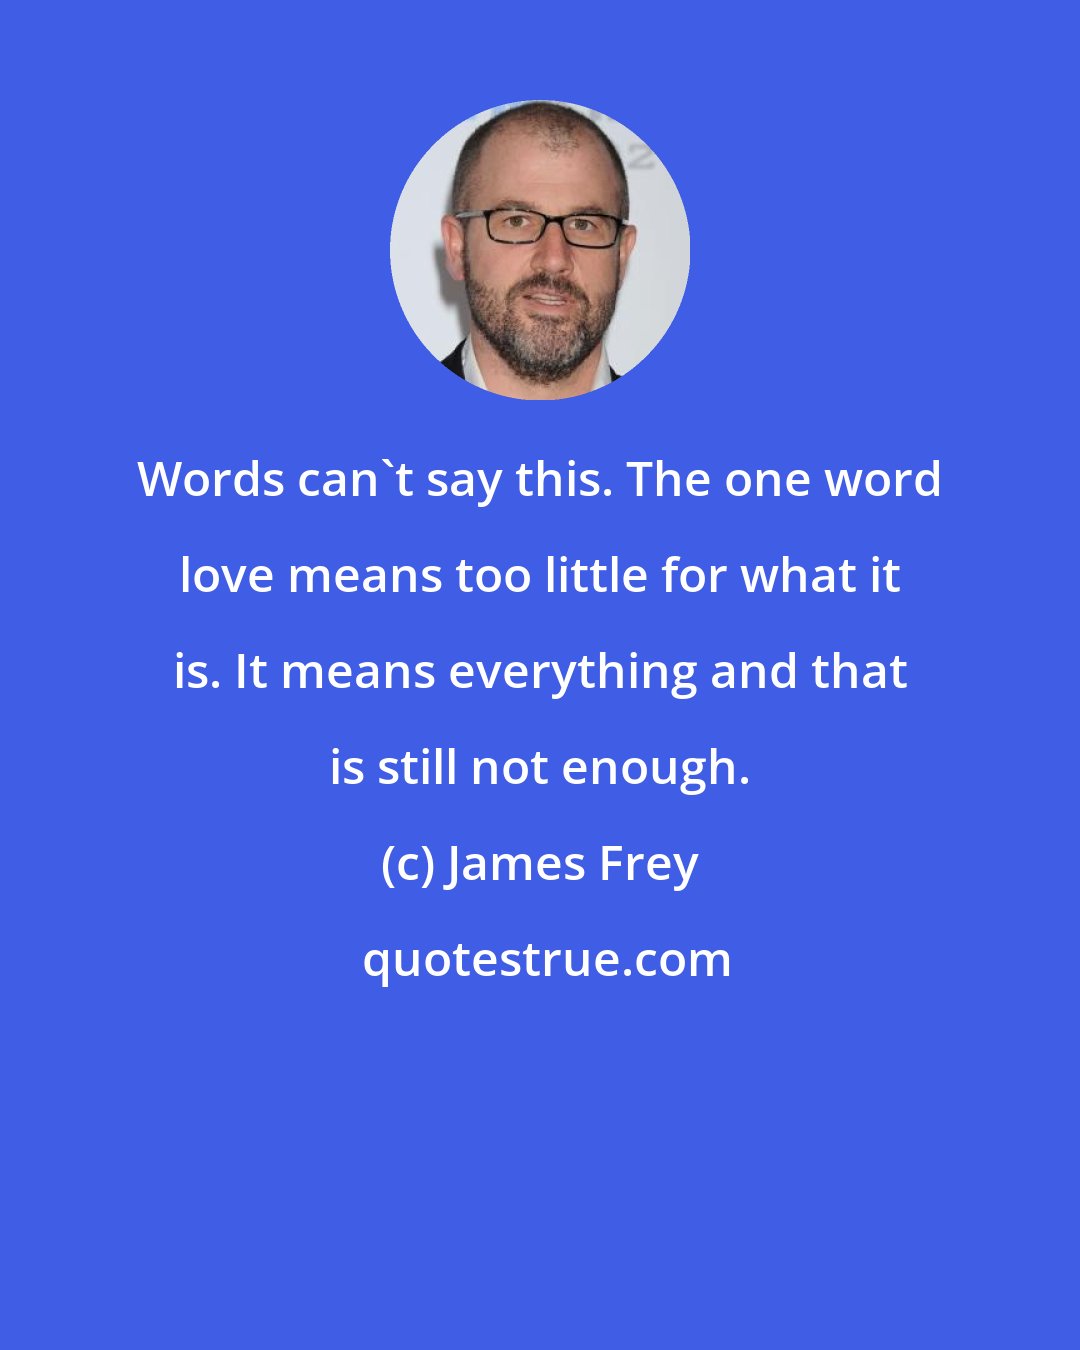 James Frey: Words can't say this. The one word love means too little for what it is. It means everything and that is still not enough.